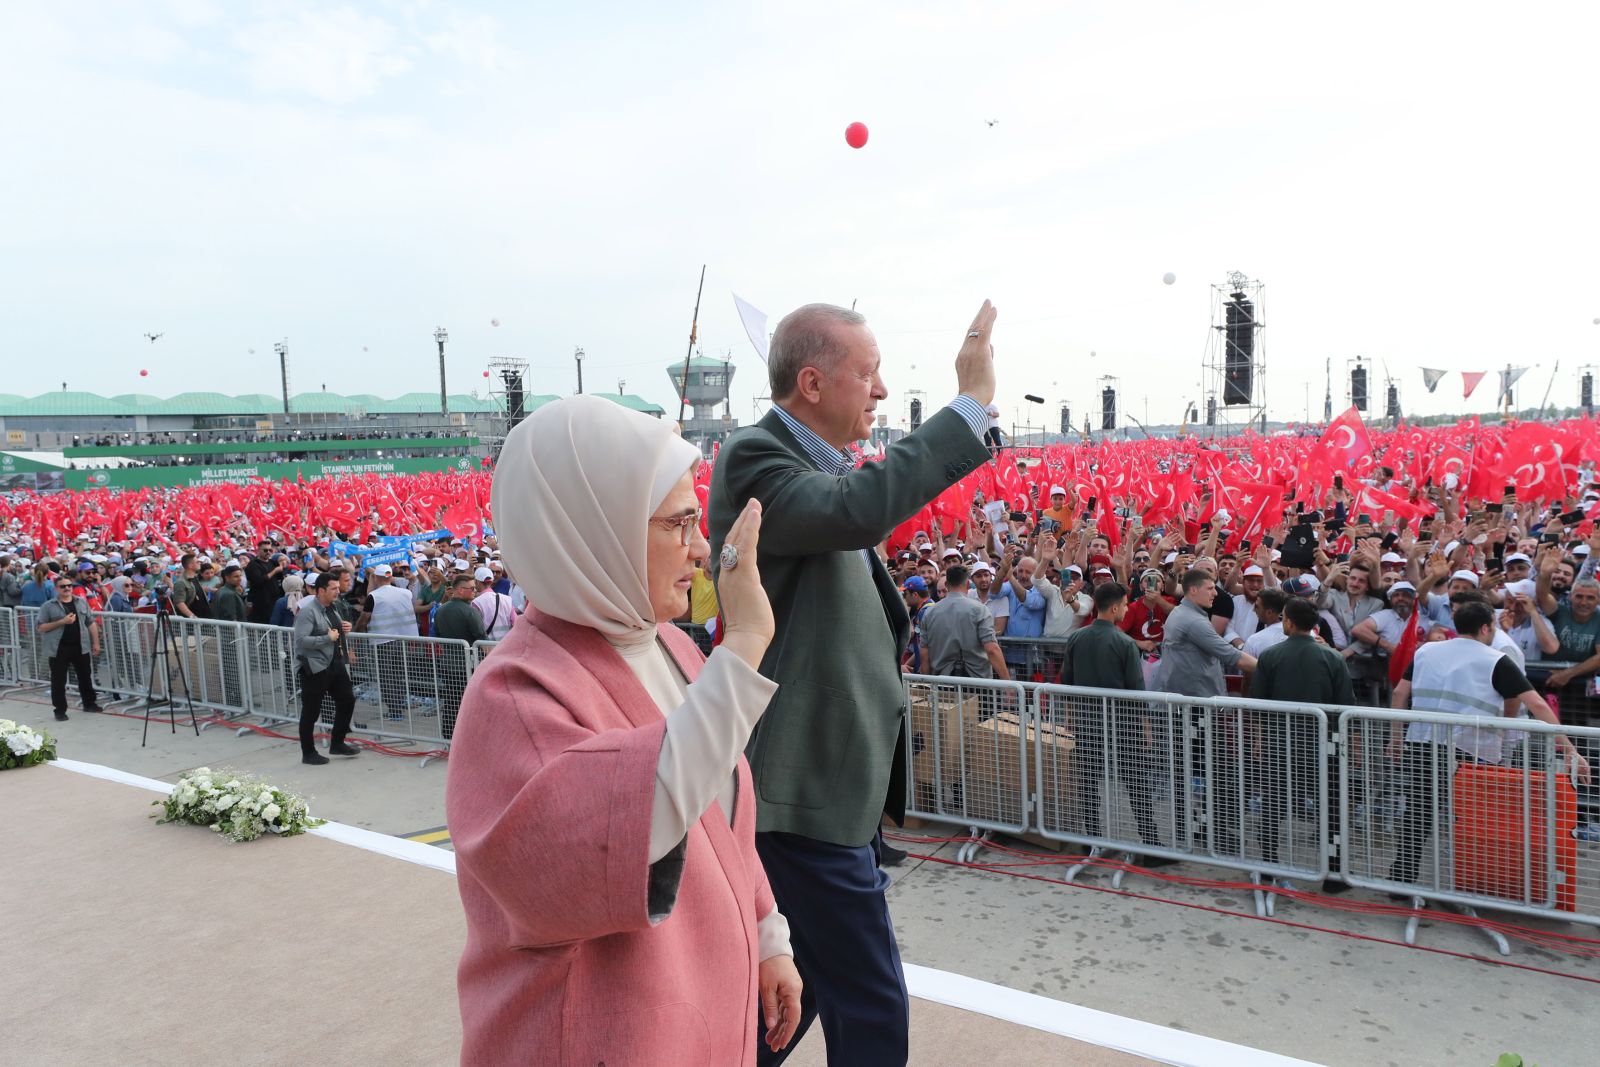 epa09984638 A handout photo made available by the Turkish President's Press Office shows Turkish President Recep Tayyip Erdogan (back) and his wife Emine Erdogan (front) greet their supporters during a ceremony of the transformation of the Ataturk Airport into a national garden in Istanbul, Turkey, 29 May 2022. A total of 132,500 saplings will be planted in an area that will be the biggest park in Turkey.  EPA/TURKISH PRESIDENT PRESS OFFICE HANDOUT  HANDOUT EDITORIAL USE ONLY/NO SALES